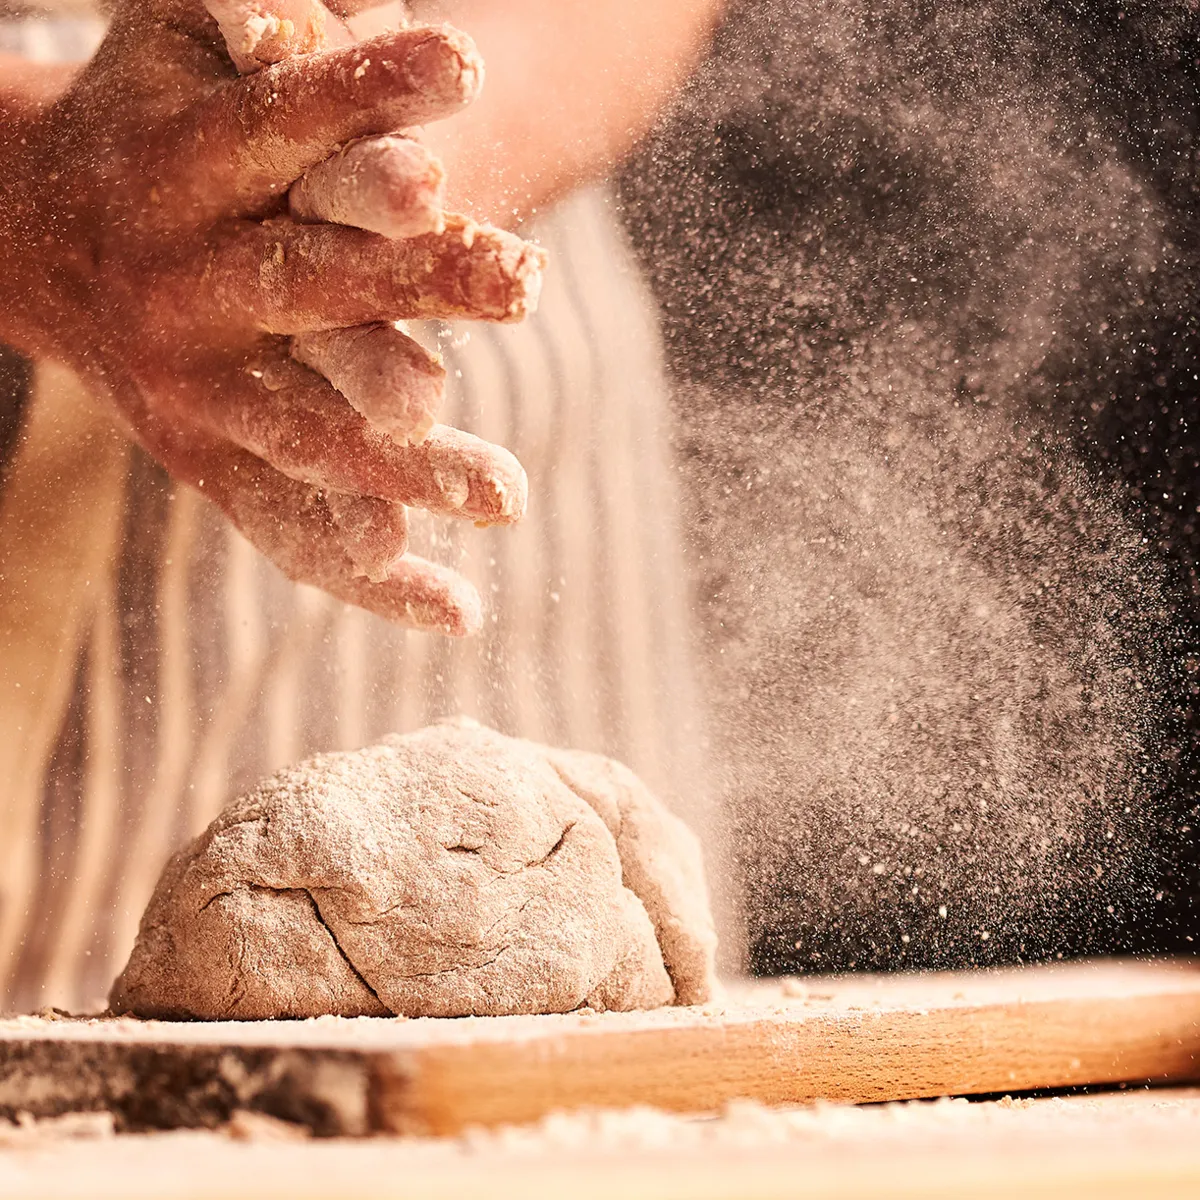 process of making bread